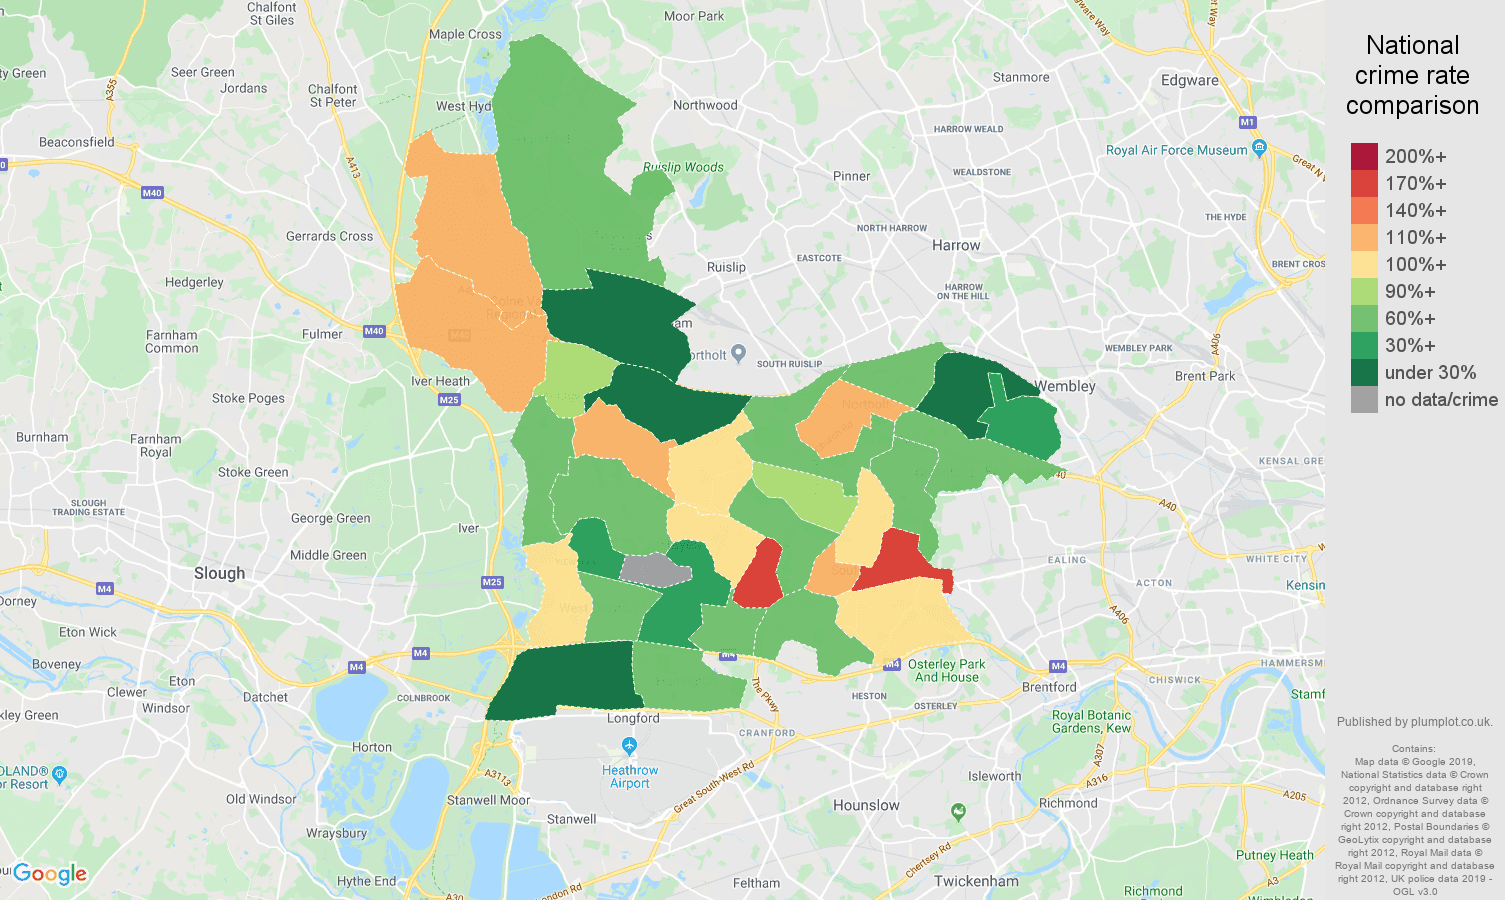 Southall possession of weapons crime rate comparison map